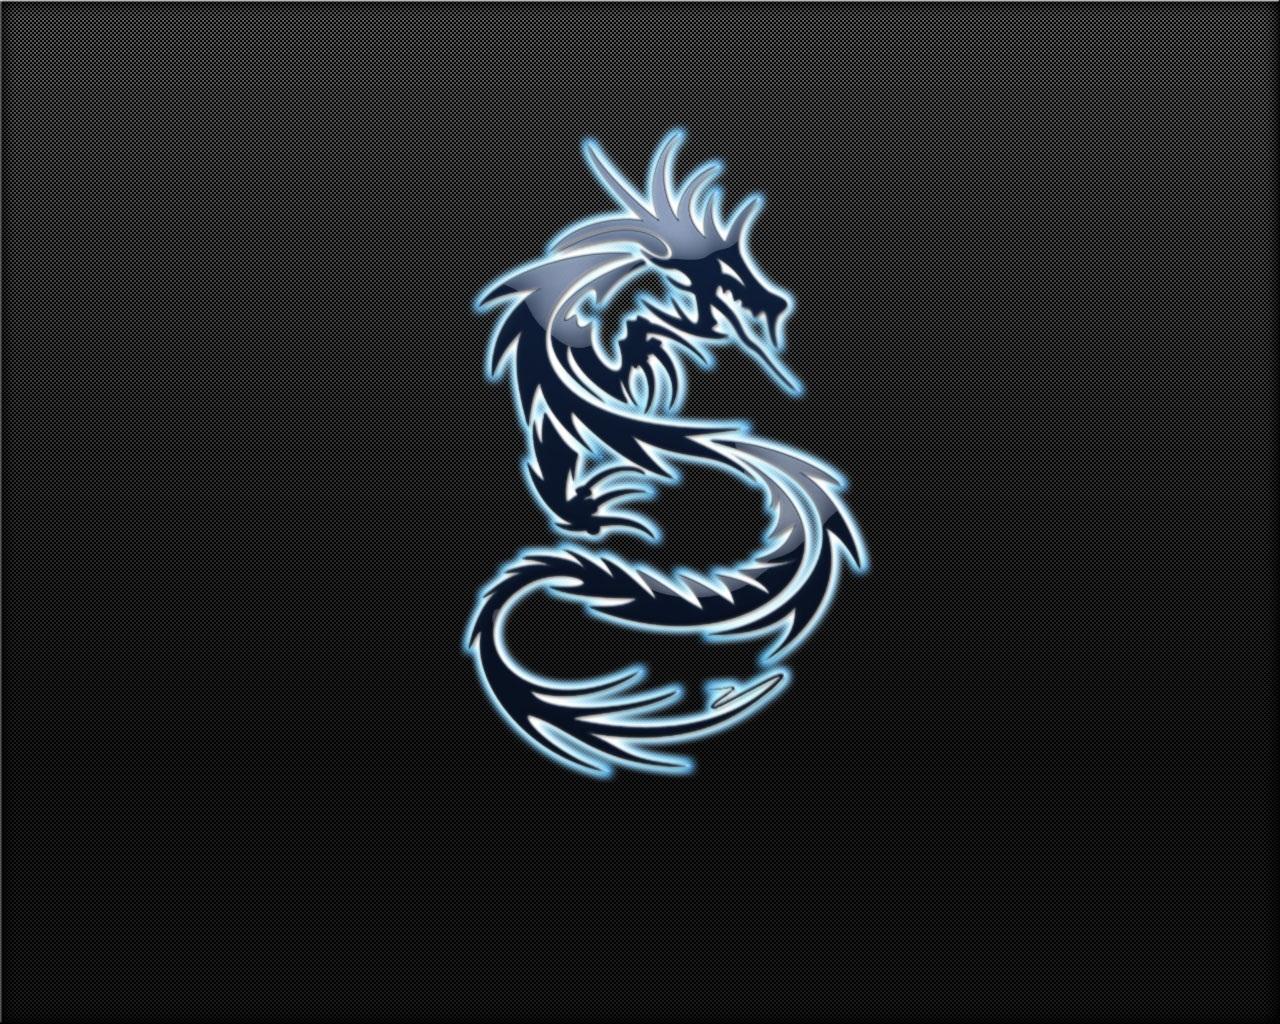 Cool Blue Fire Dragon Wallpapers - Top Free Cool Blue Fire Dragon ...